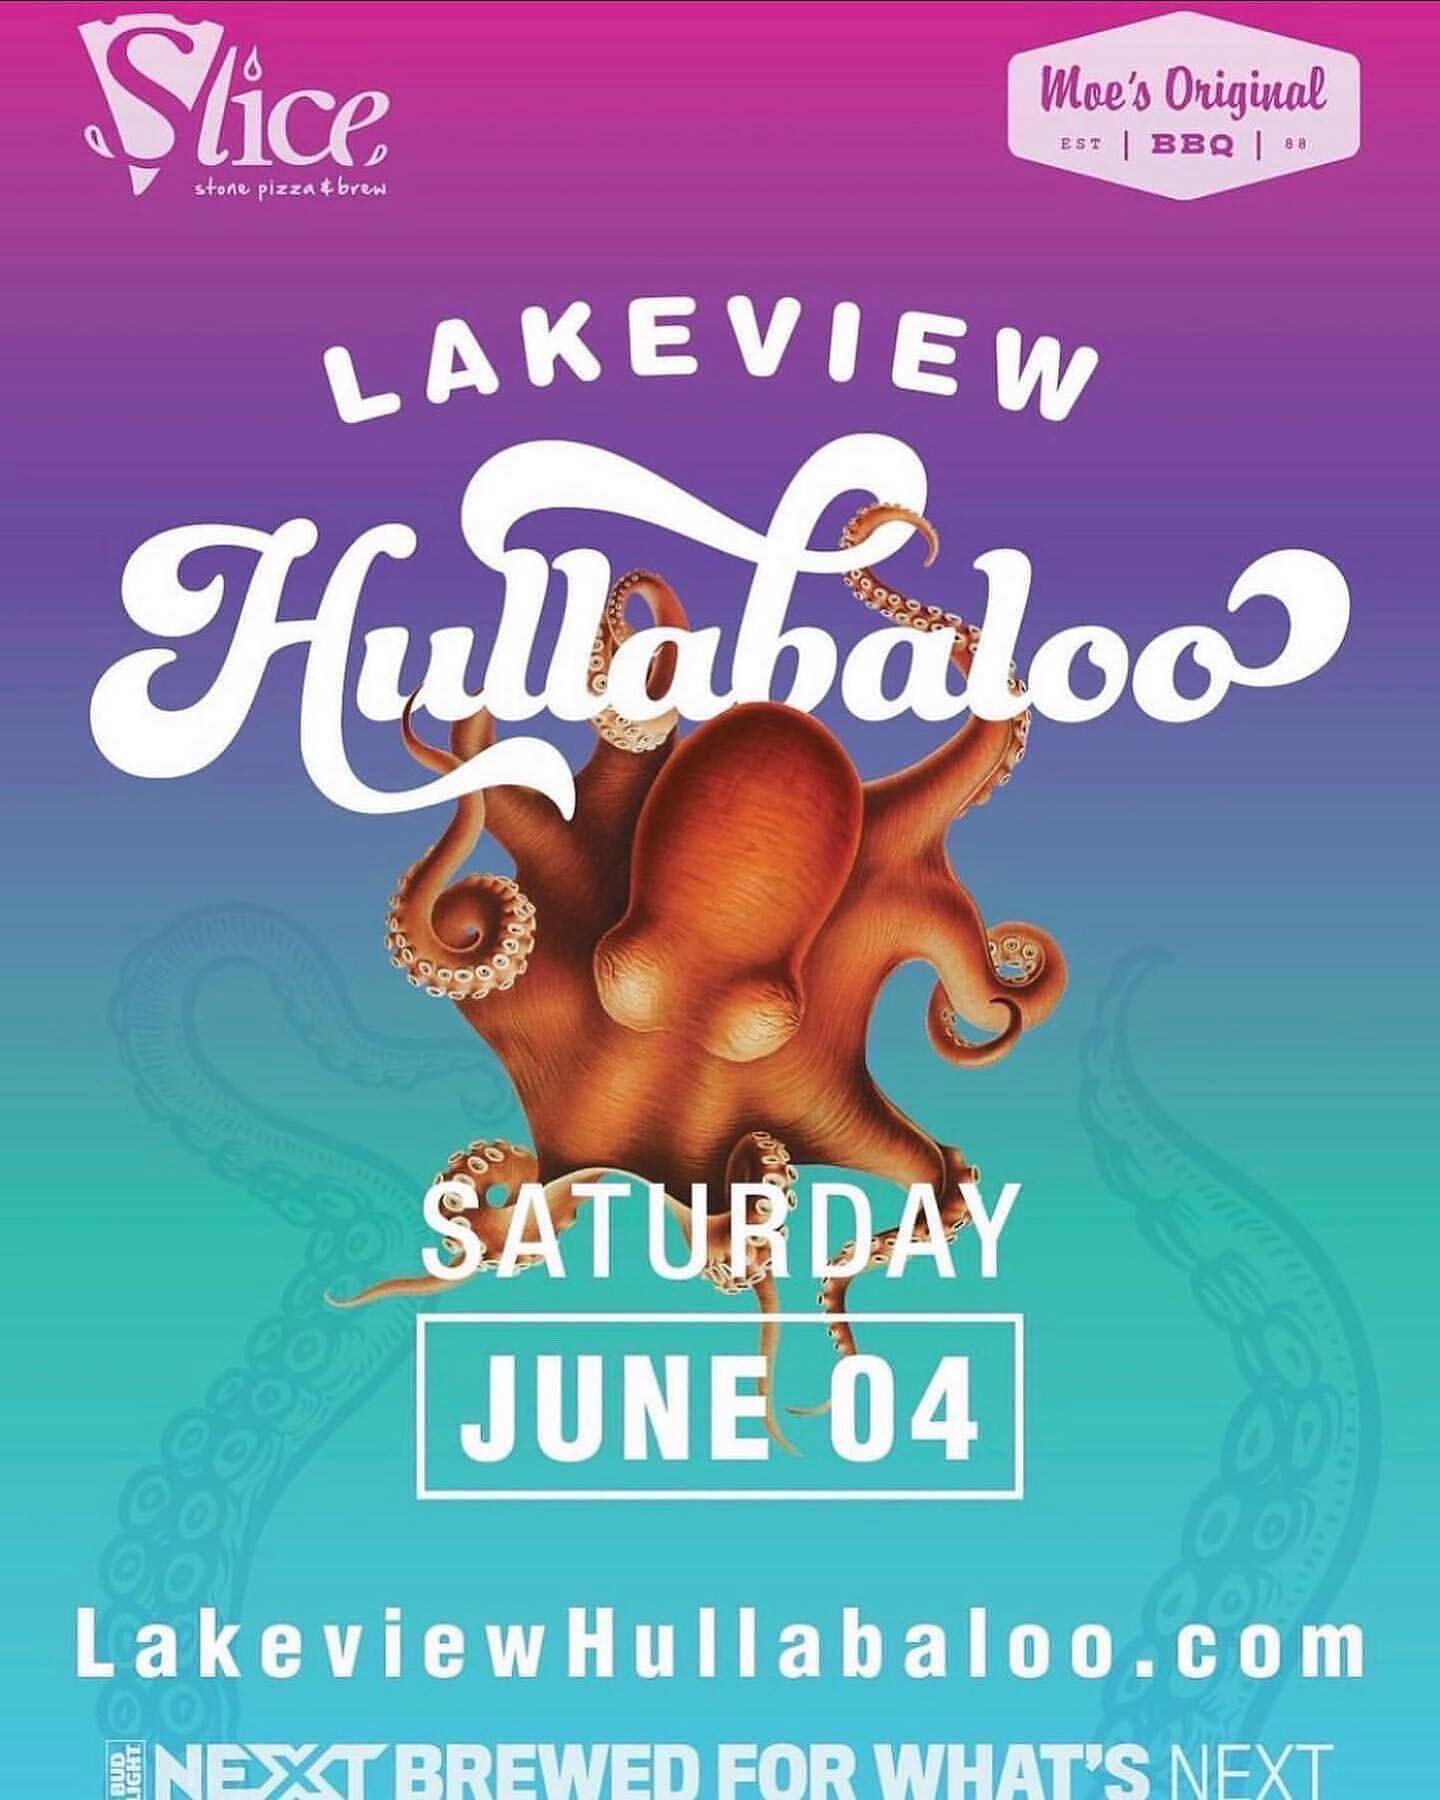 🚨 GIVEAWAY 🚨 
Get ready for one the biggest events on Lakeview this Saturday! @lakeviewhullabaloo 
To make your entrance and access easier we are giving away 2 VIP tickets! 
To enter: 
&ldquo;LIKE&rdquo; this post 
👀 follow @adiosbar and @unostaco